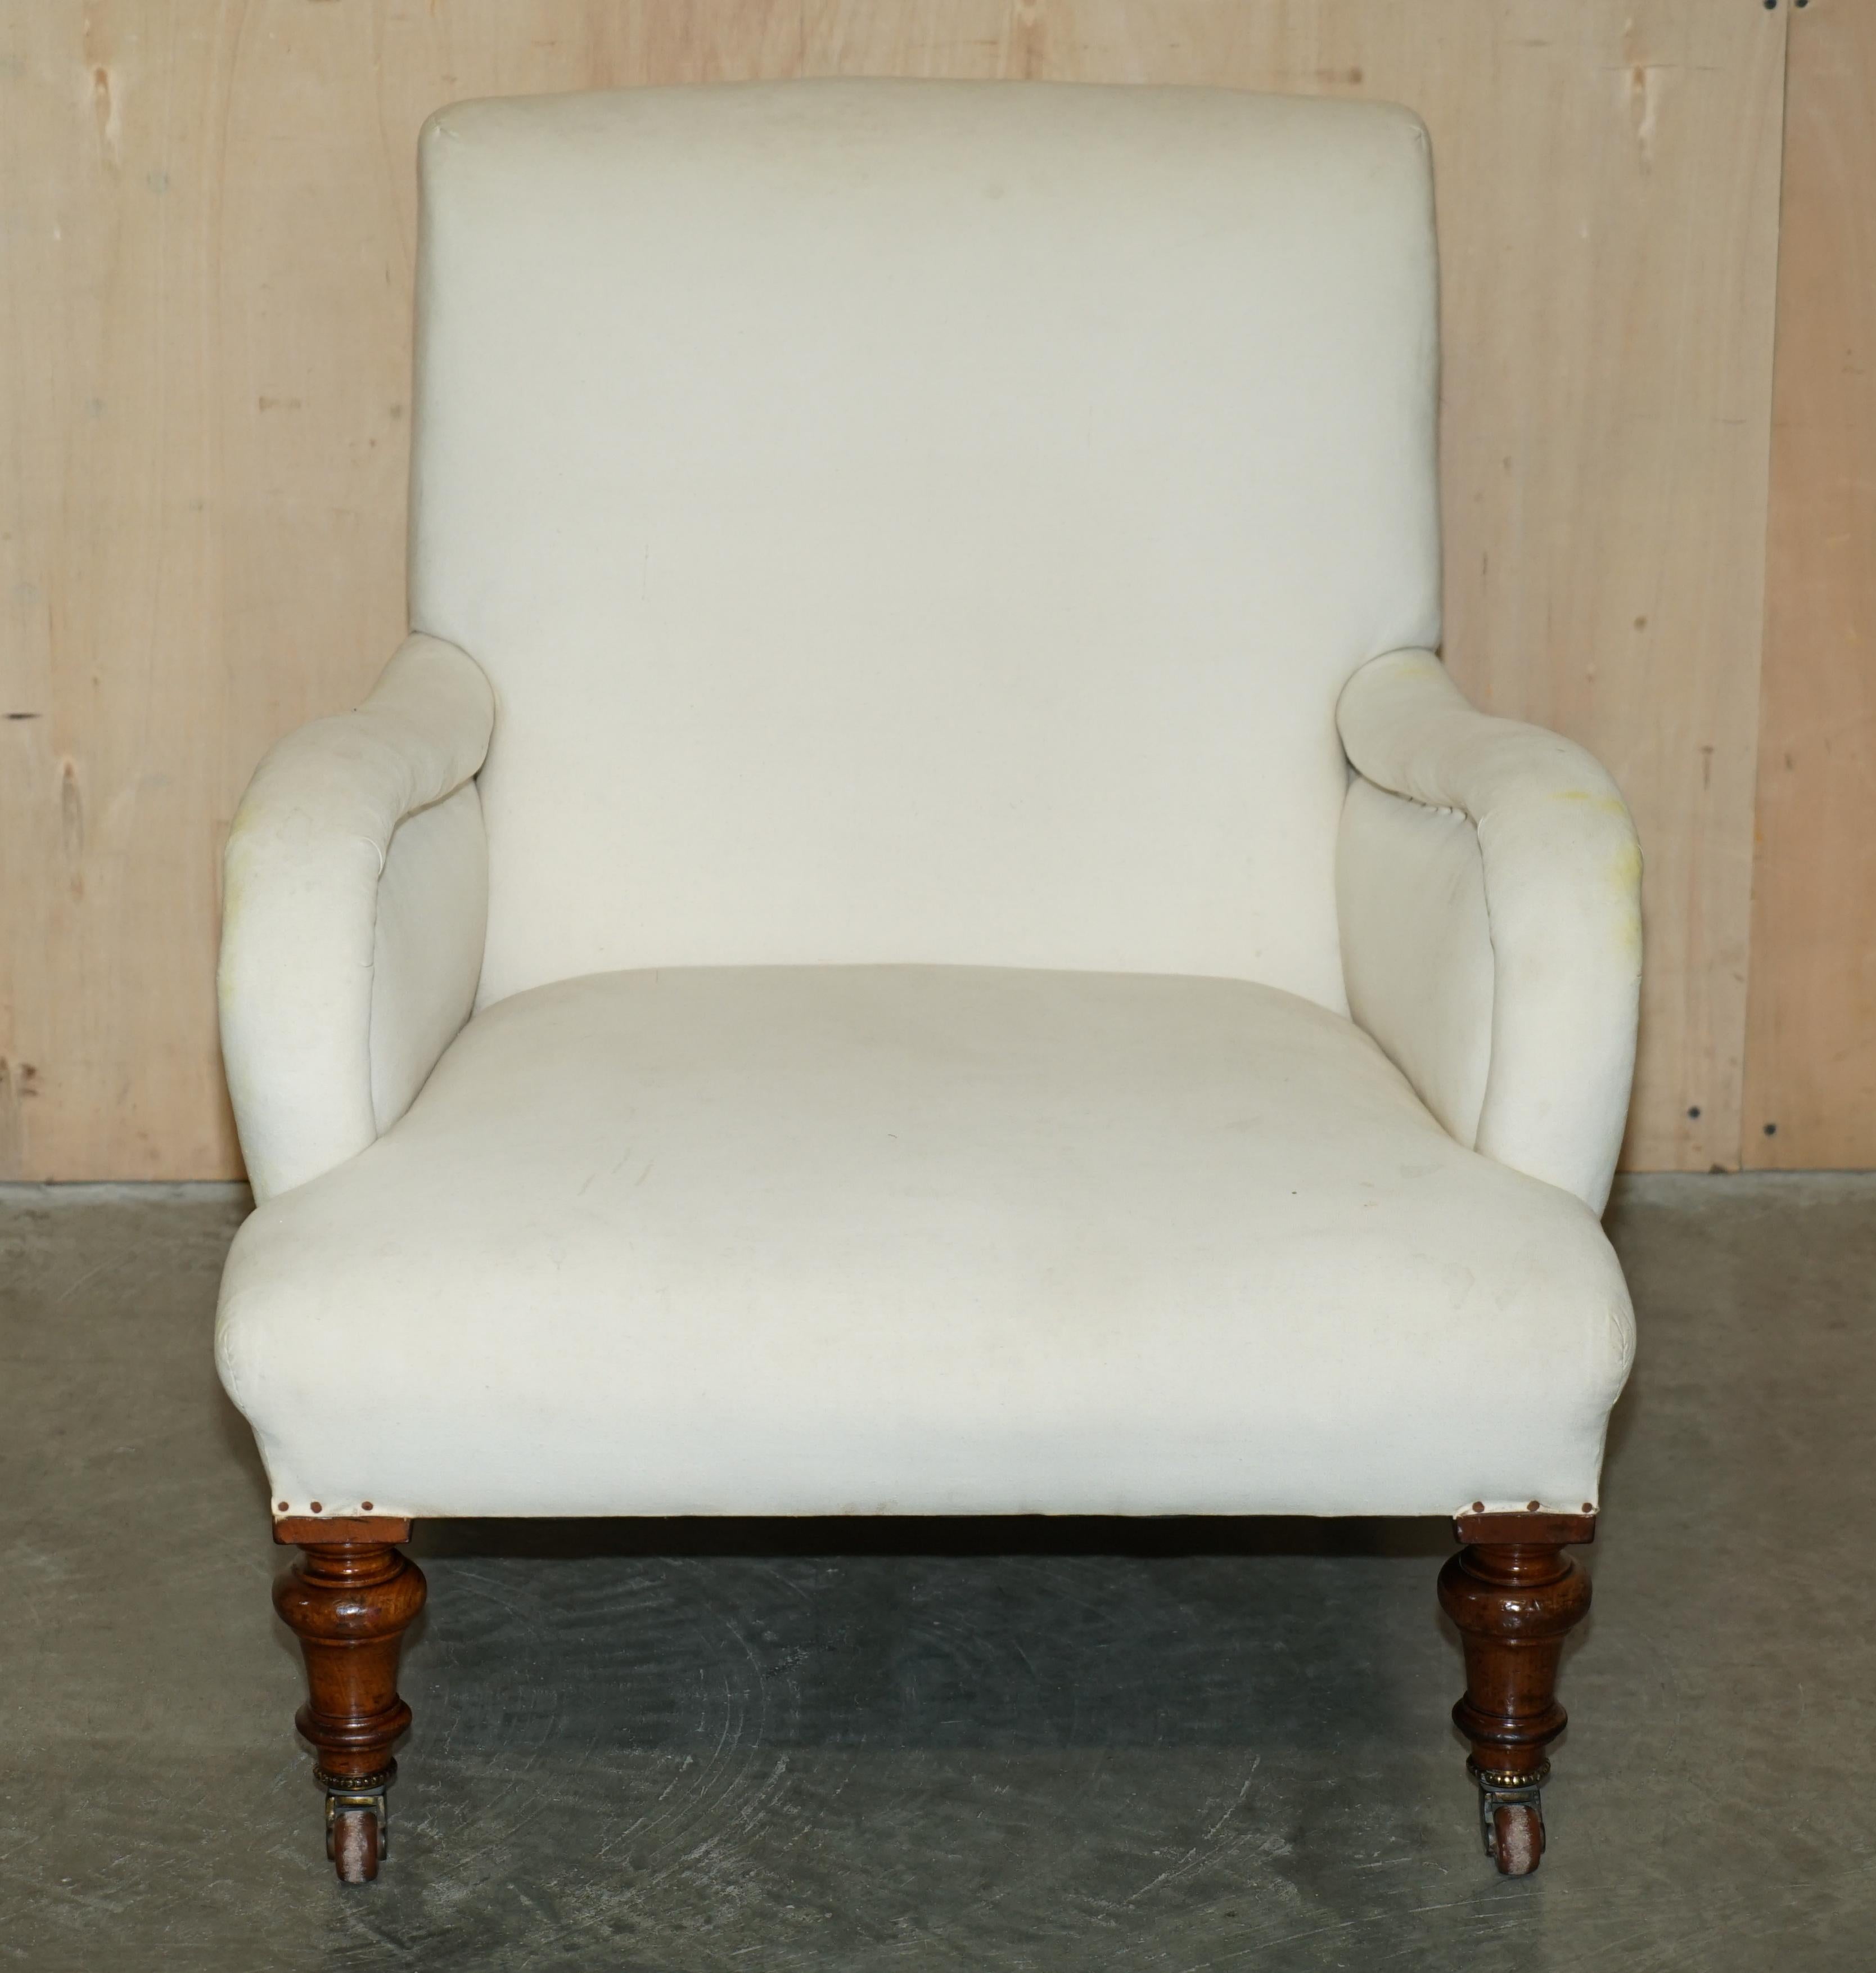 Royal House Antiques

Royal House Antiques is delighted to offer for sale this lovely original Victorian armchair with period Porcelain castors in Calico upholstery in the style of Howard & Son's Bridgewater model 

Please note the delivery fee